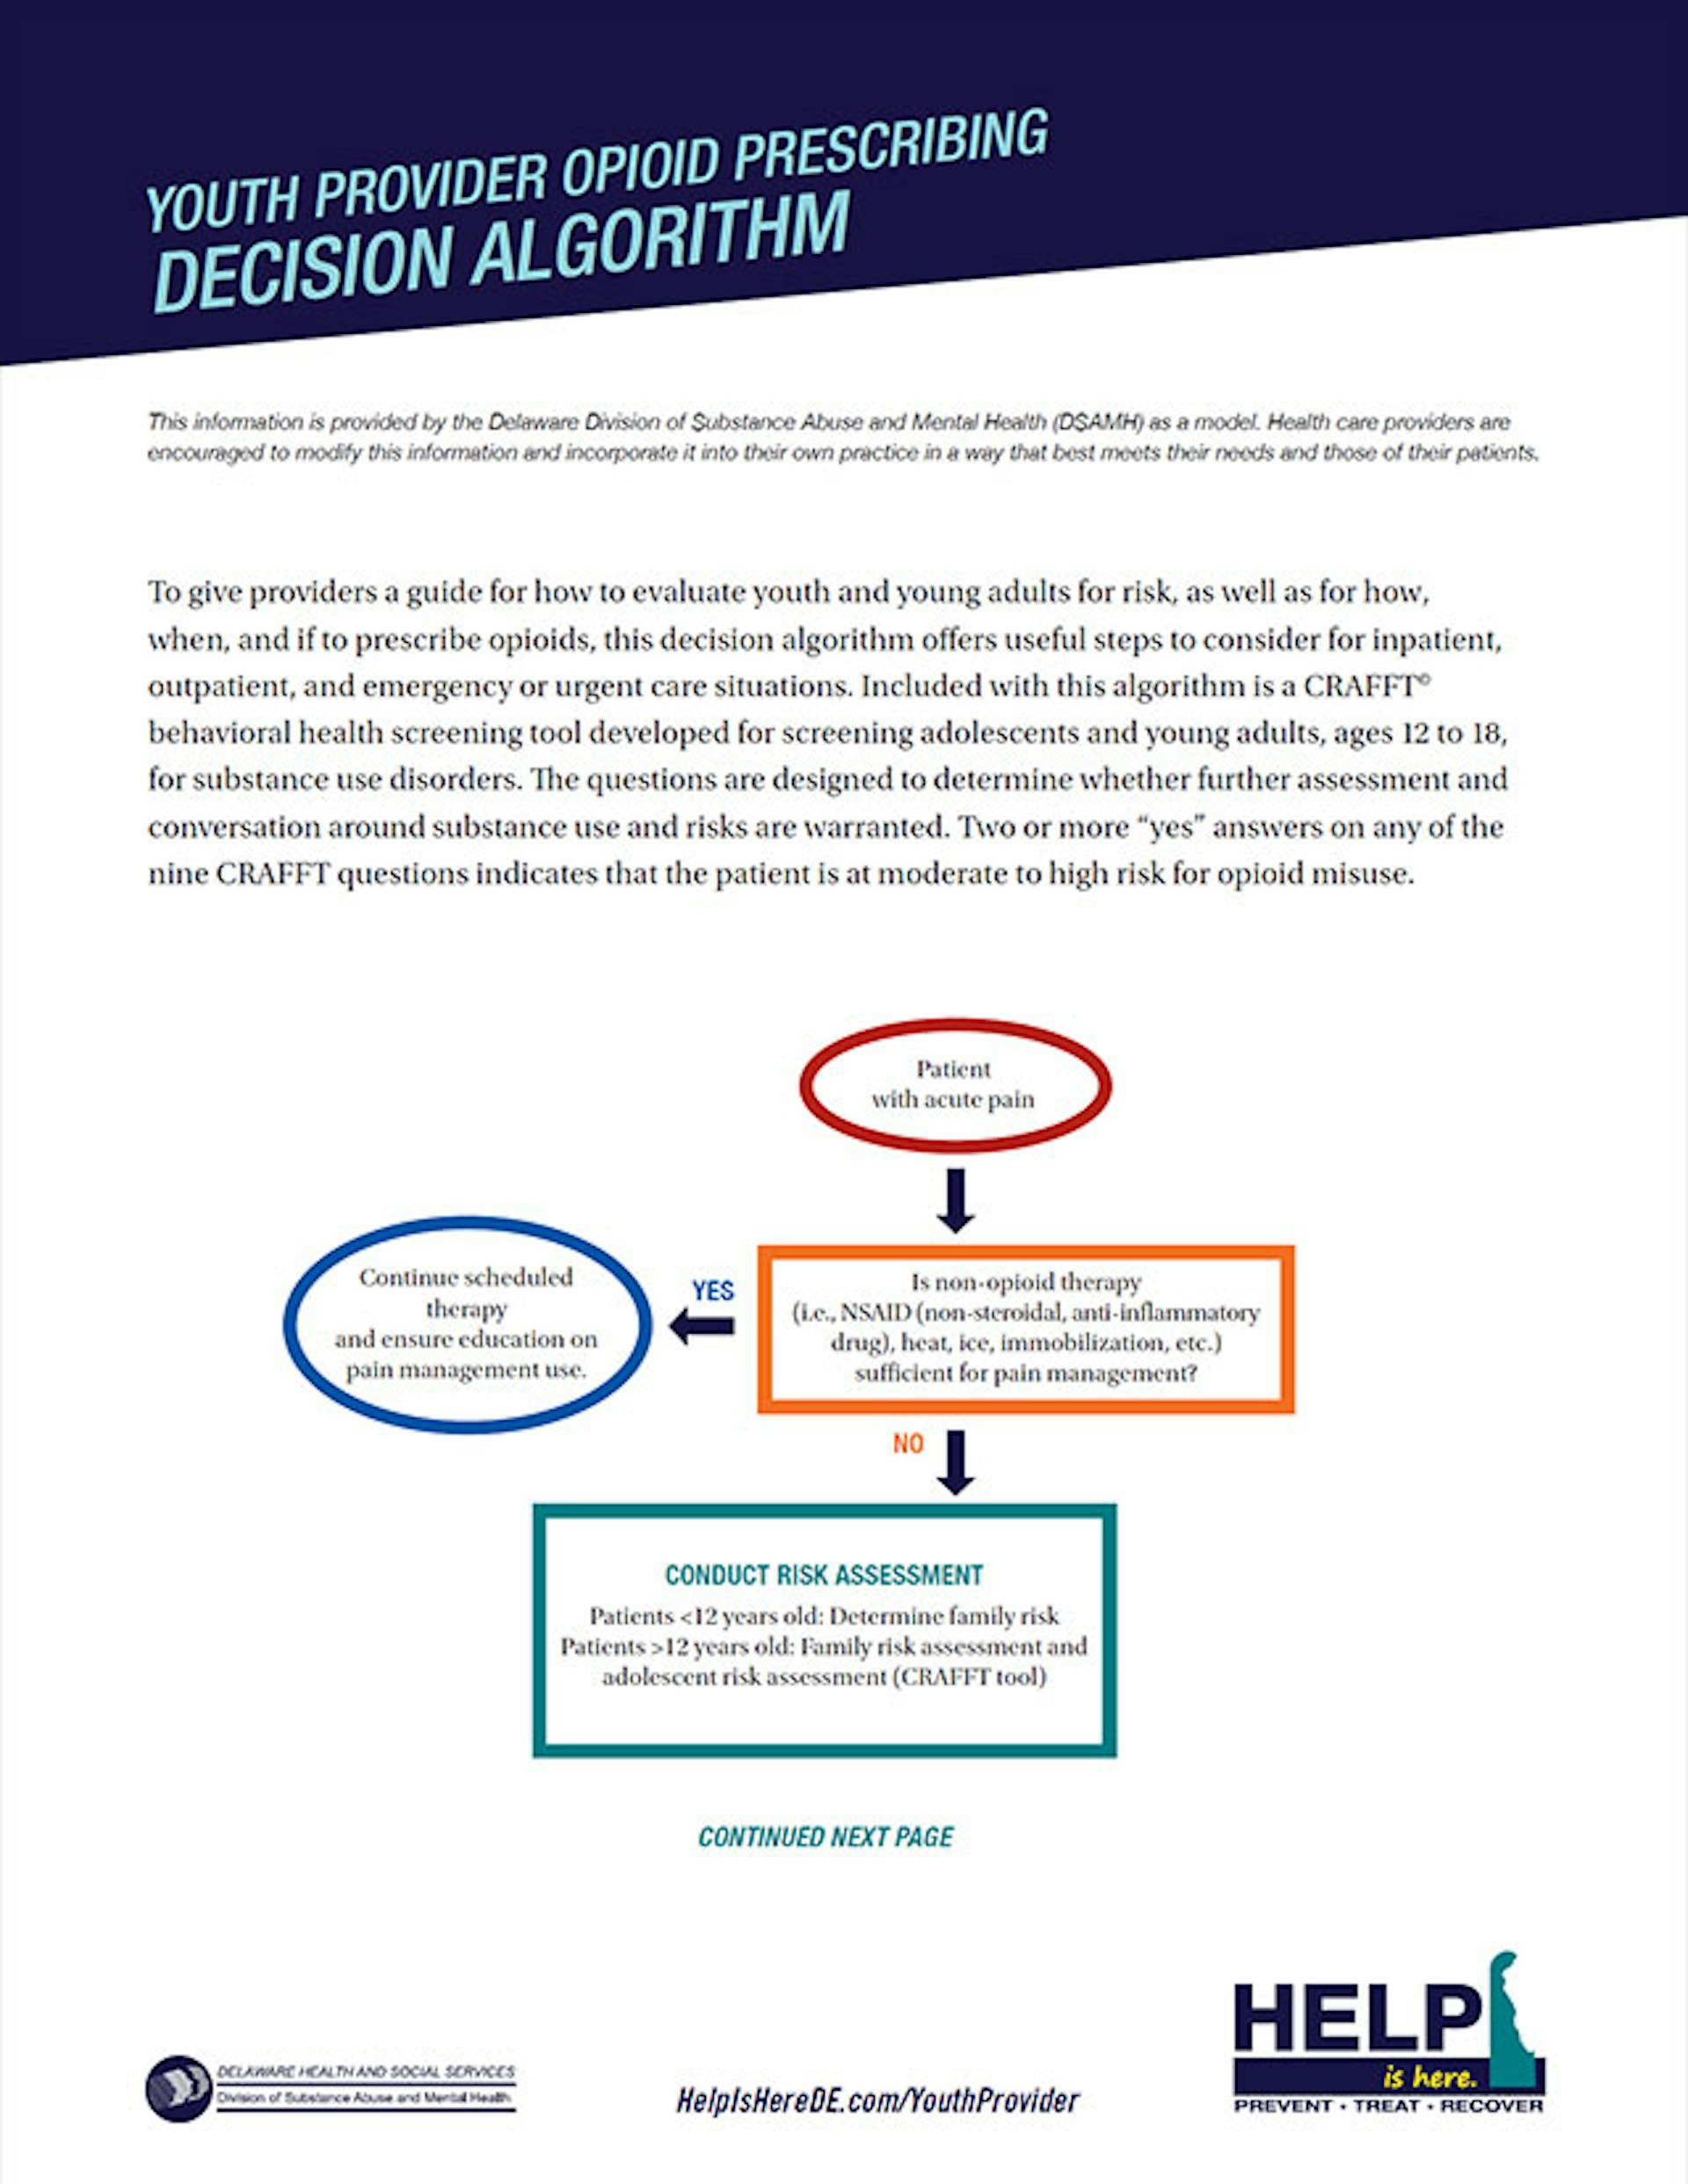 Decision Tree Algorithm for Prescribing Opioids to Youth and Young Adults